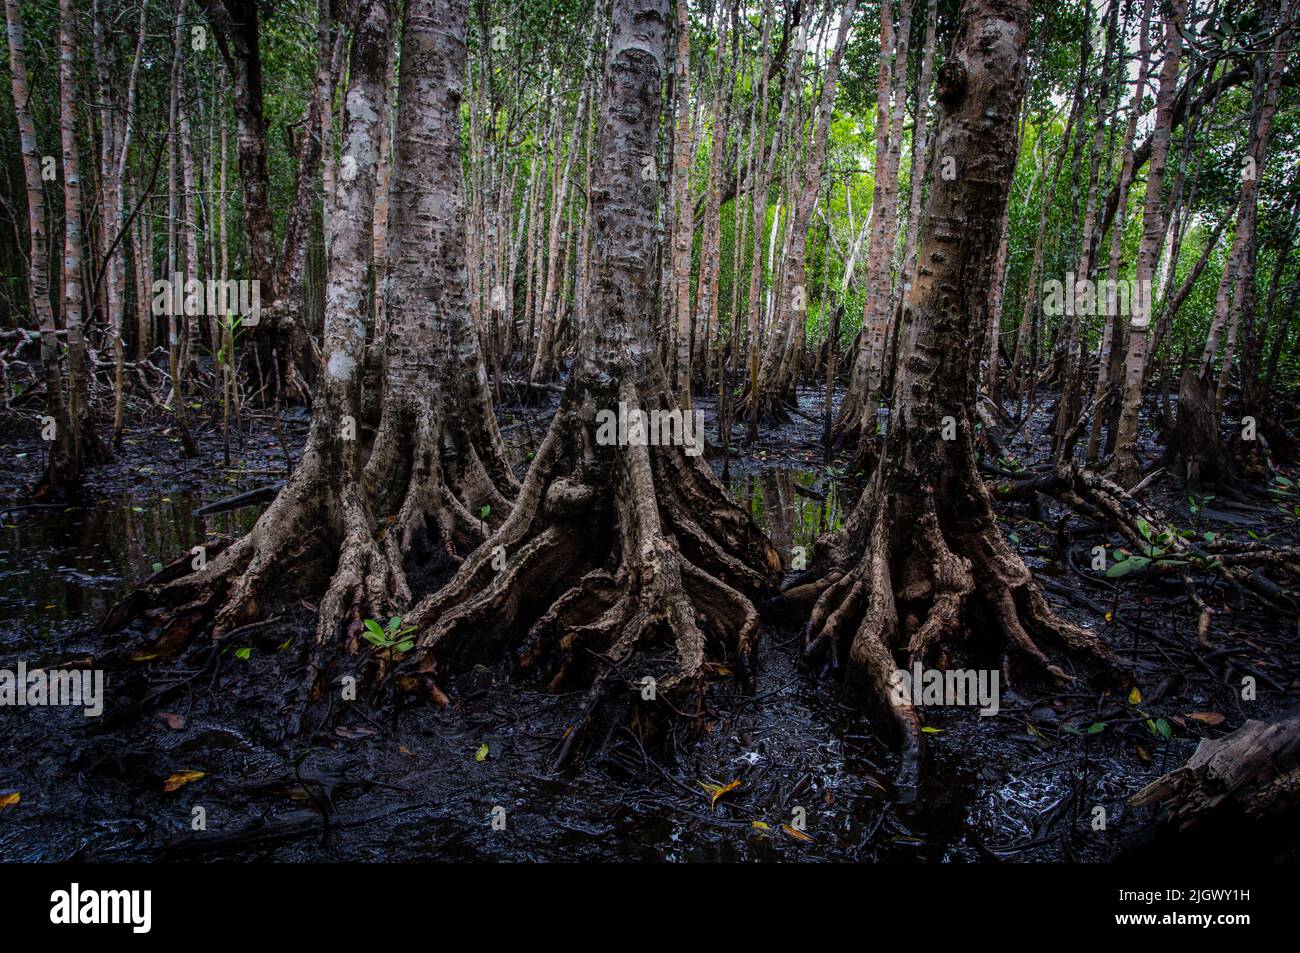 Mangroves suck up carbon dioxide and other greenhouse gases and trap them in their flooded anoxic soils for millennia. Stock Photo